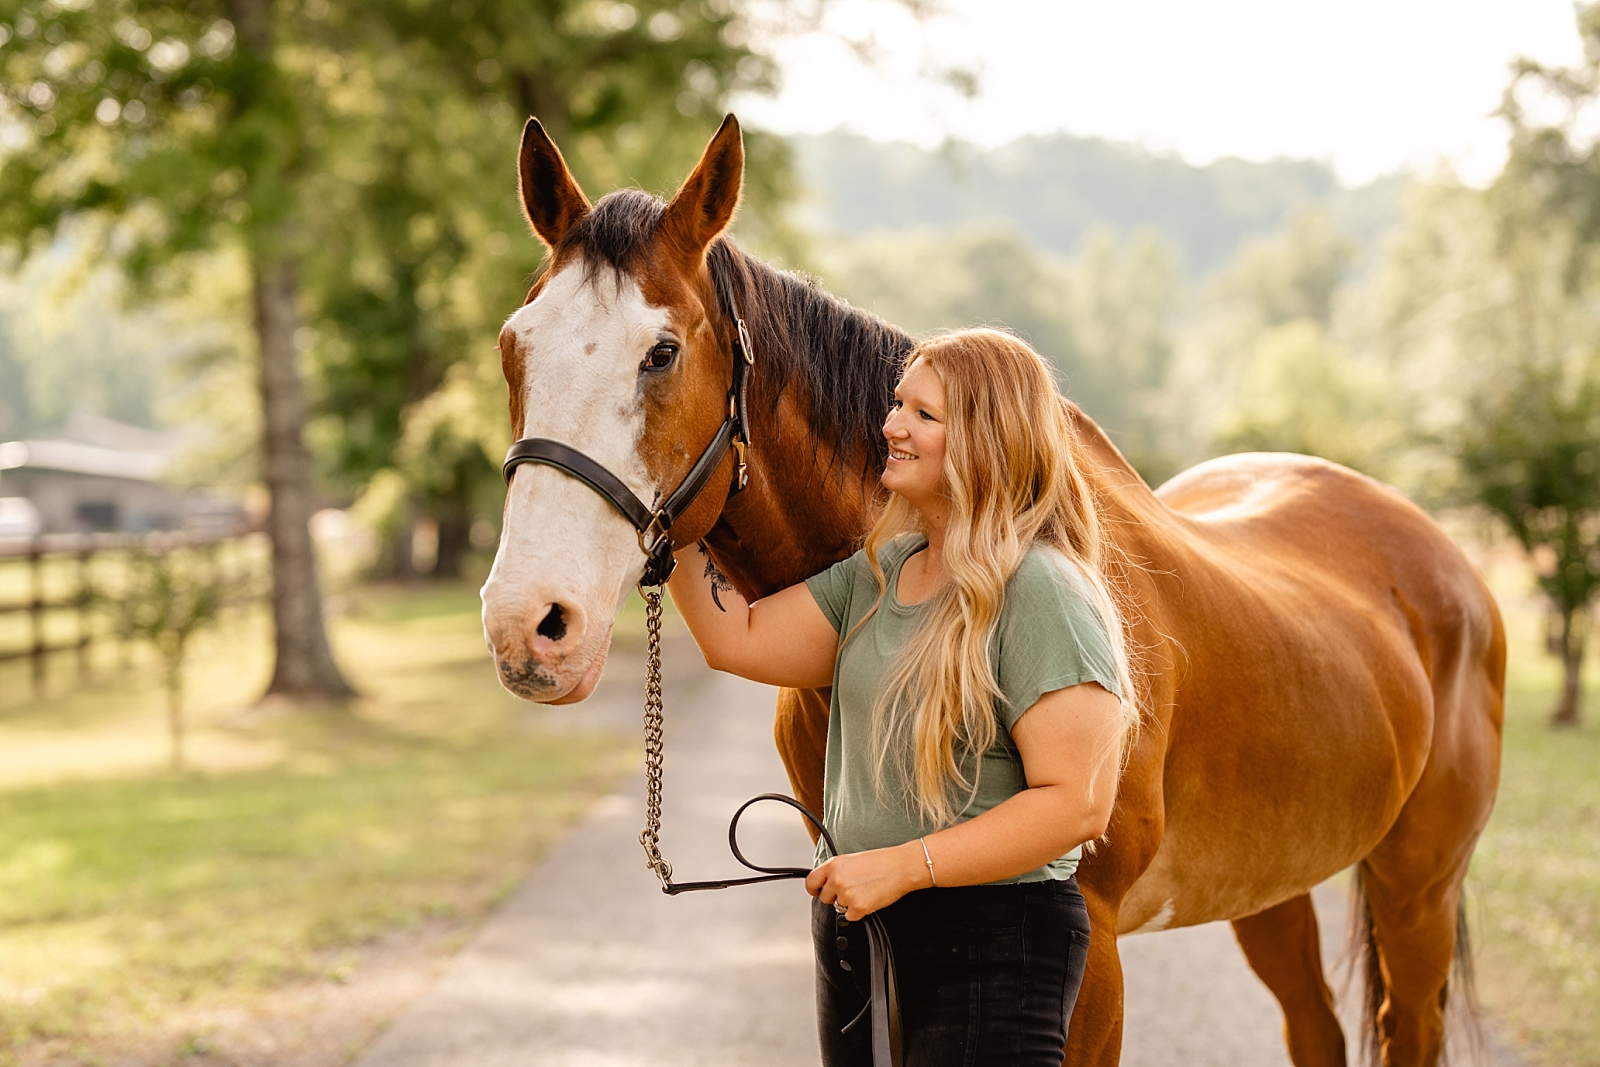 Equestrian photographer in Alabama. Woman with her first horse with the Alabama mountains in the background.